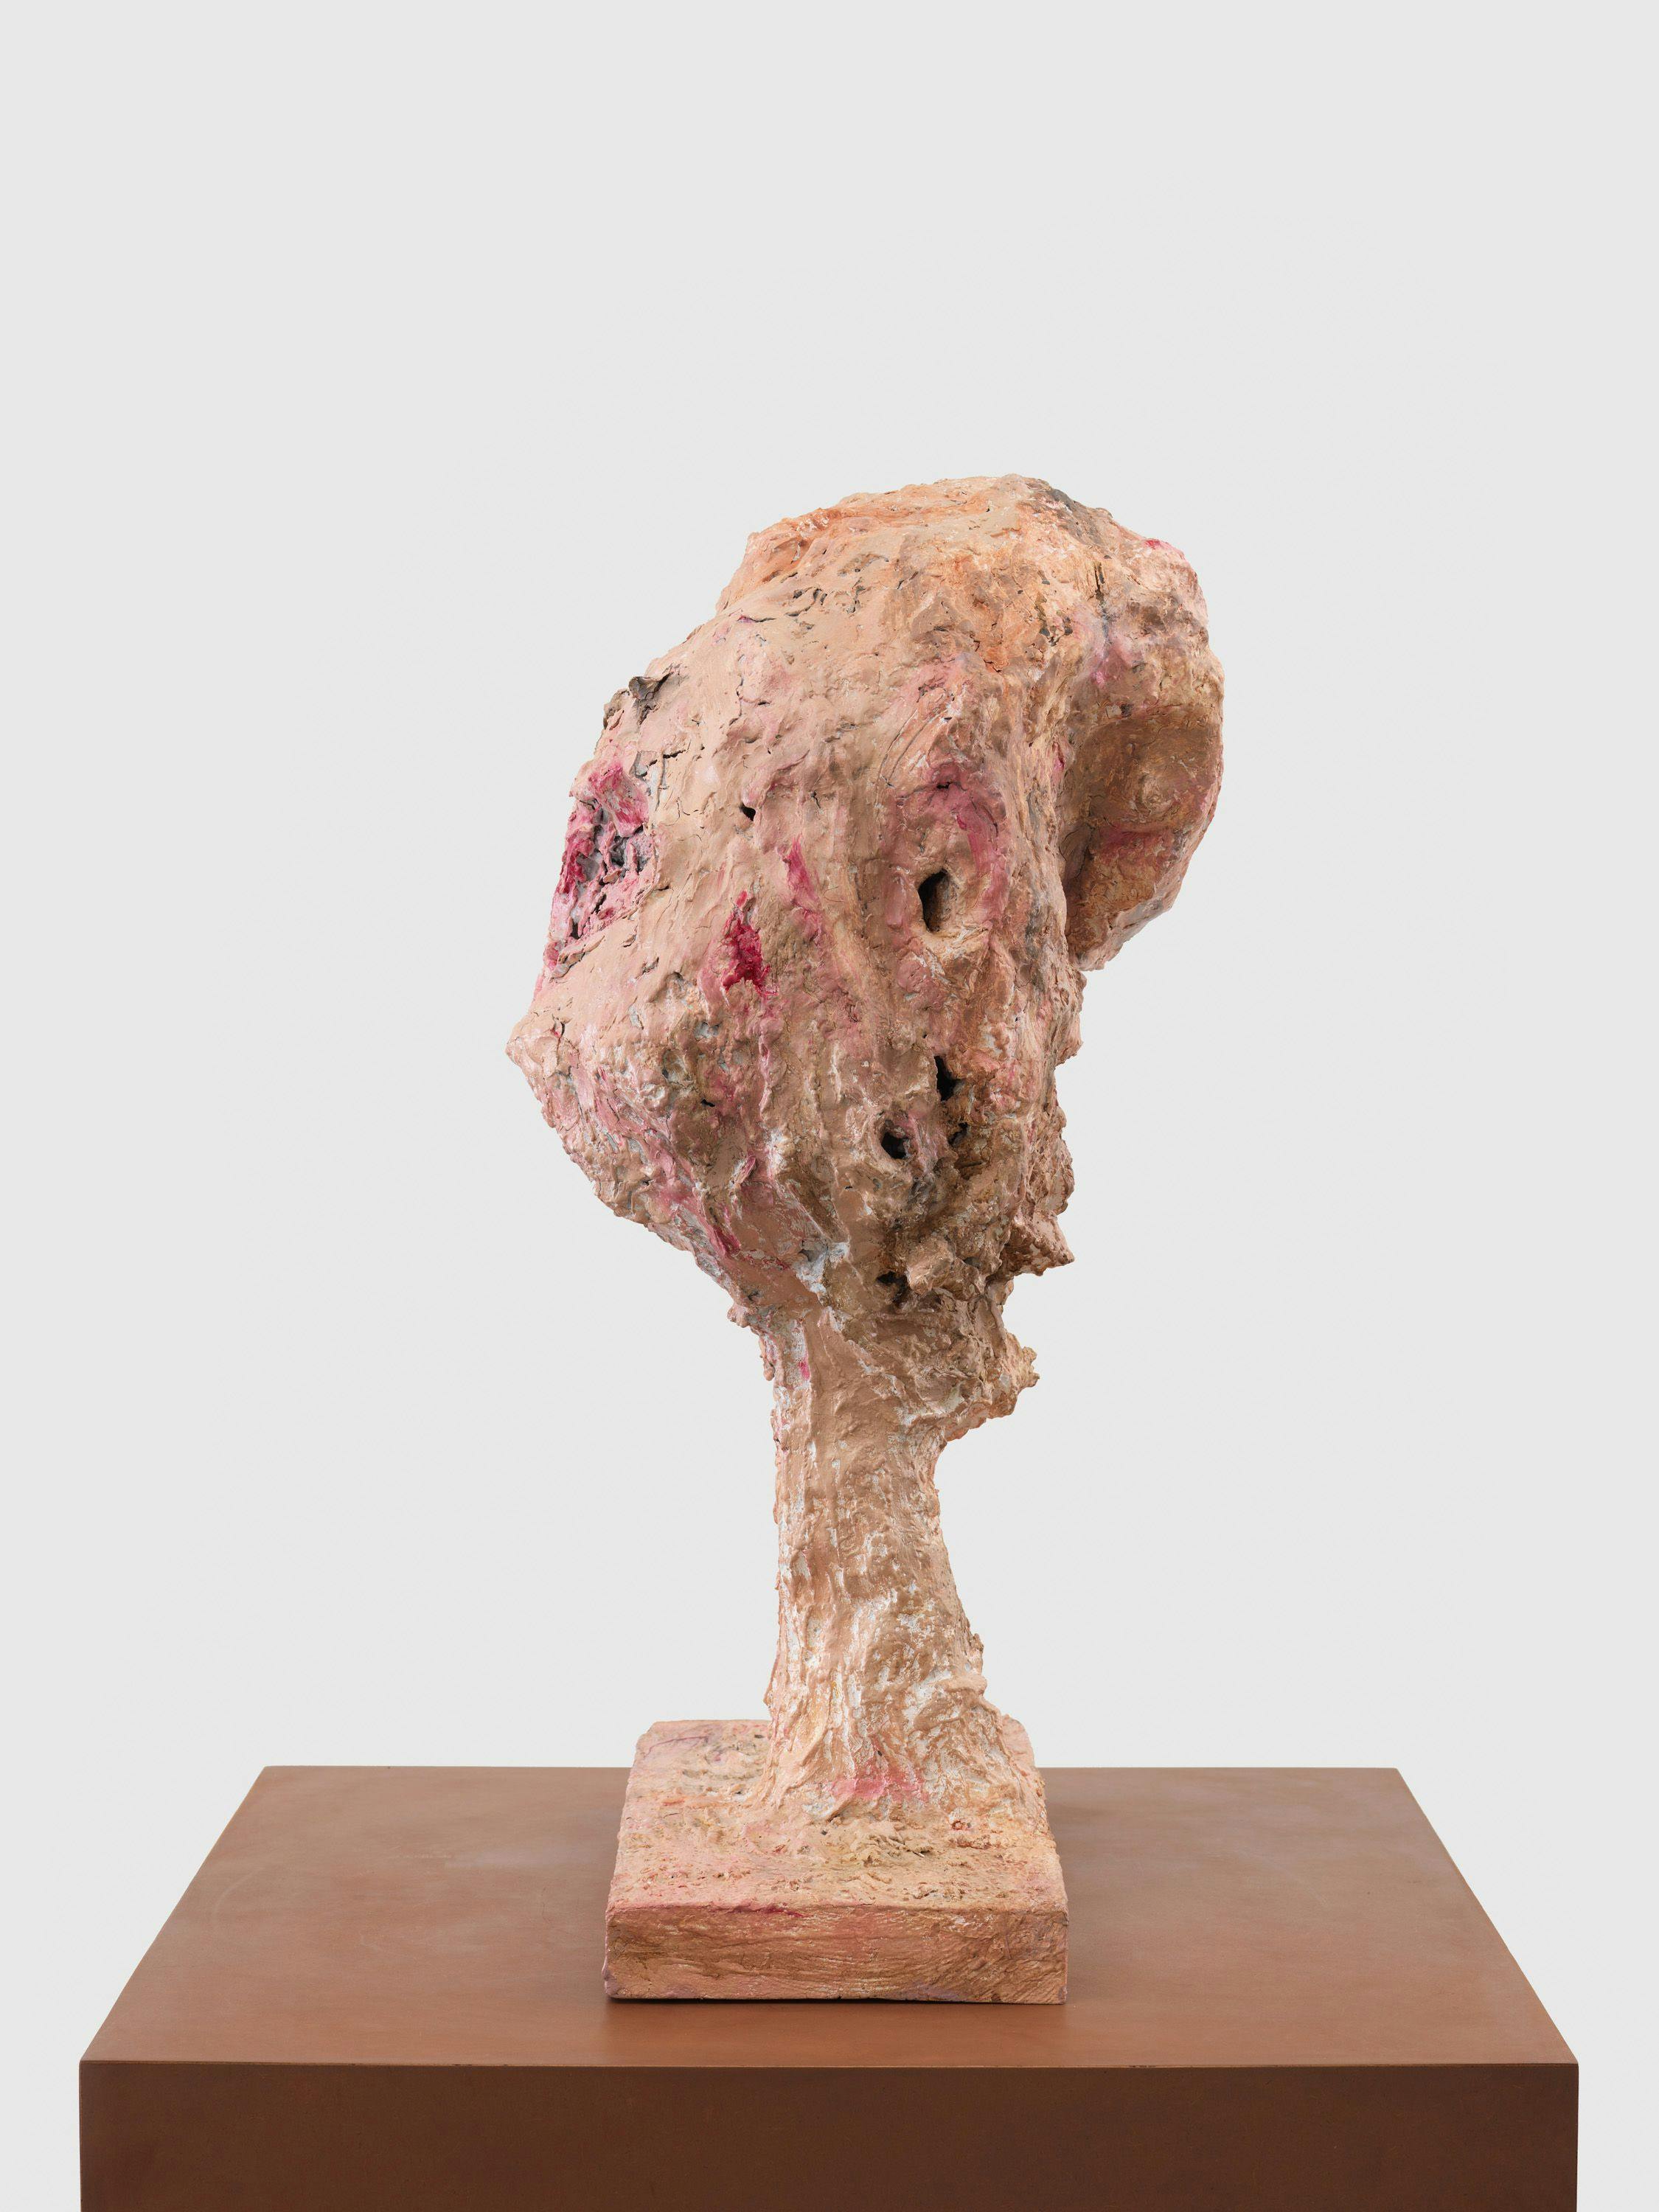 A detail from a sculpture by Huma Bhabha, titled Soft Touch, dated 2021.